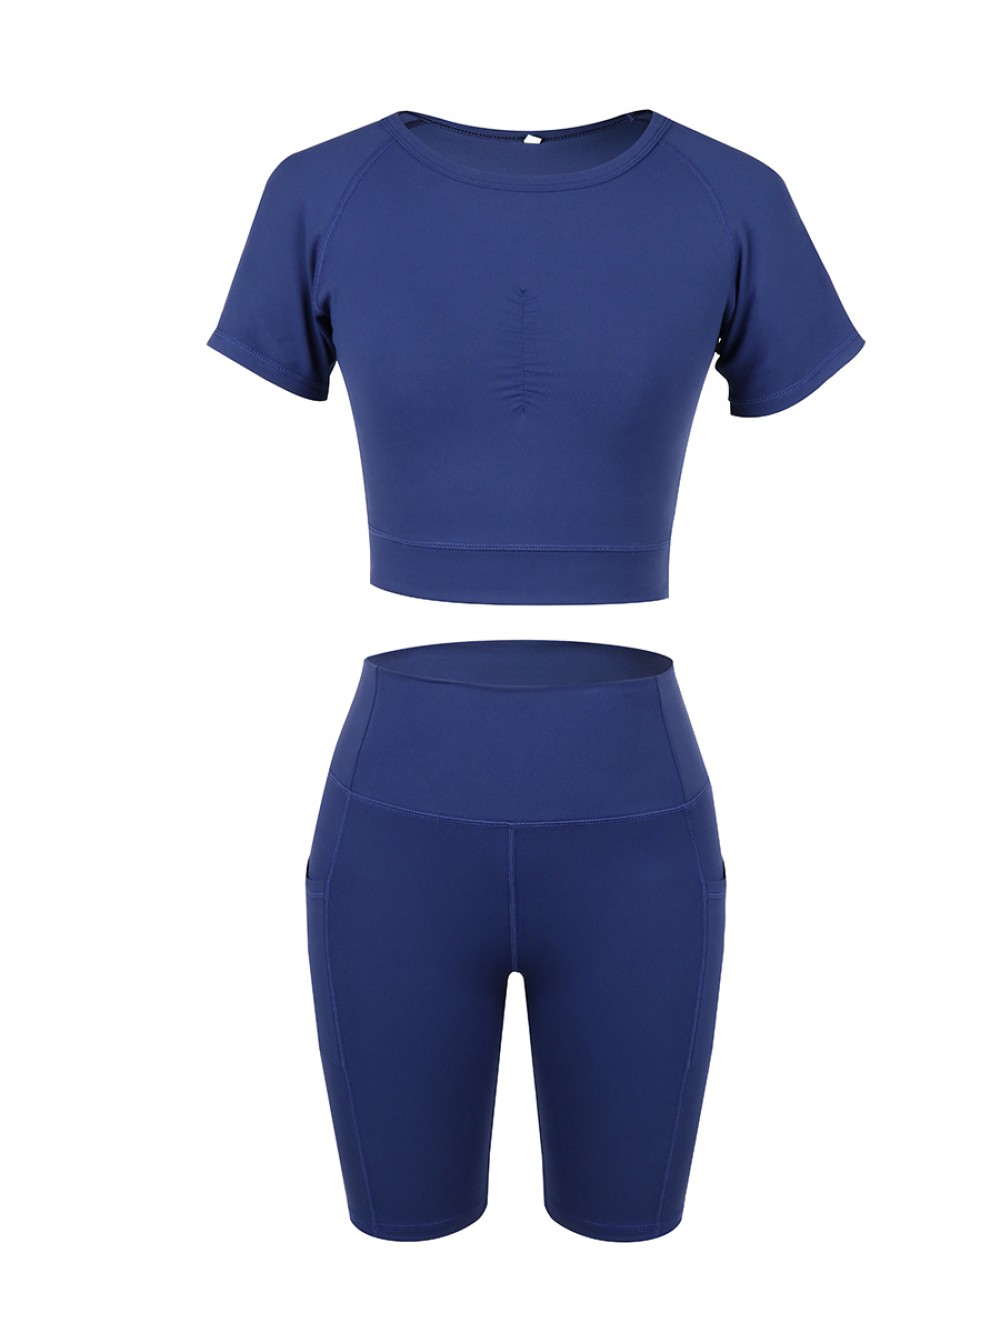 Simply Chic Dark Blue Ruched Athletic Set Solid Color Glamor